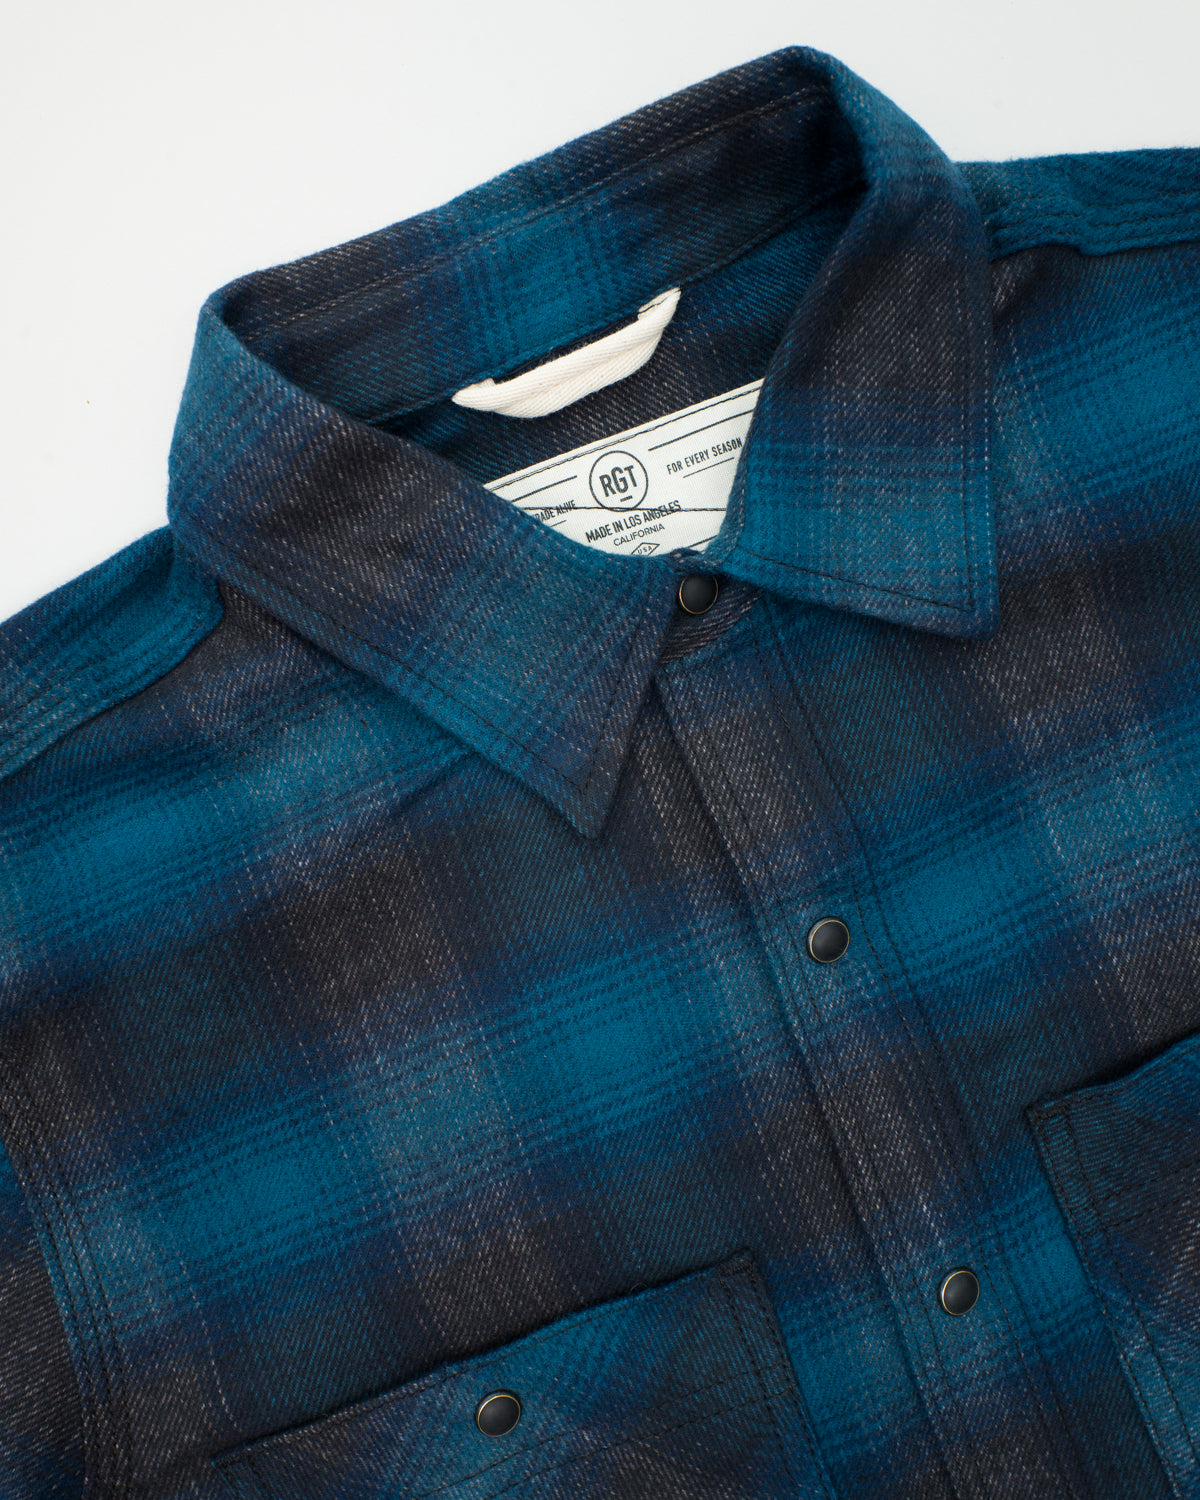 Men's Flannel Shirts for sale in Los Angeles, California